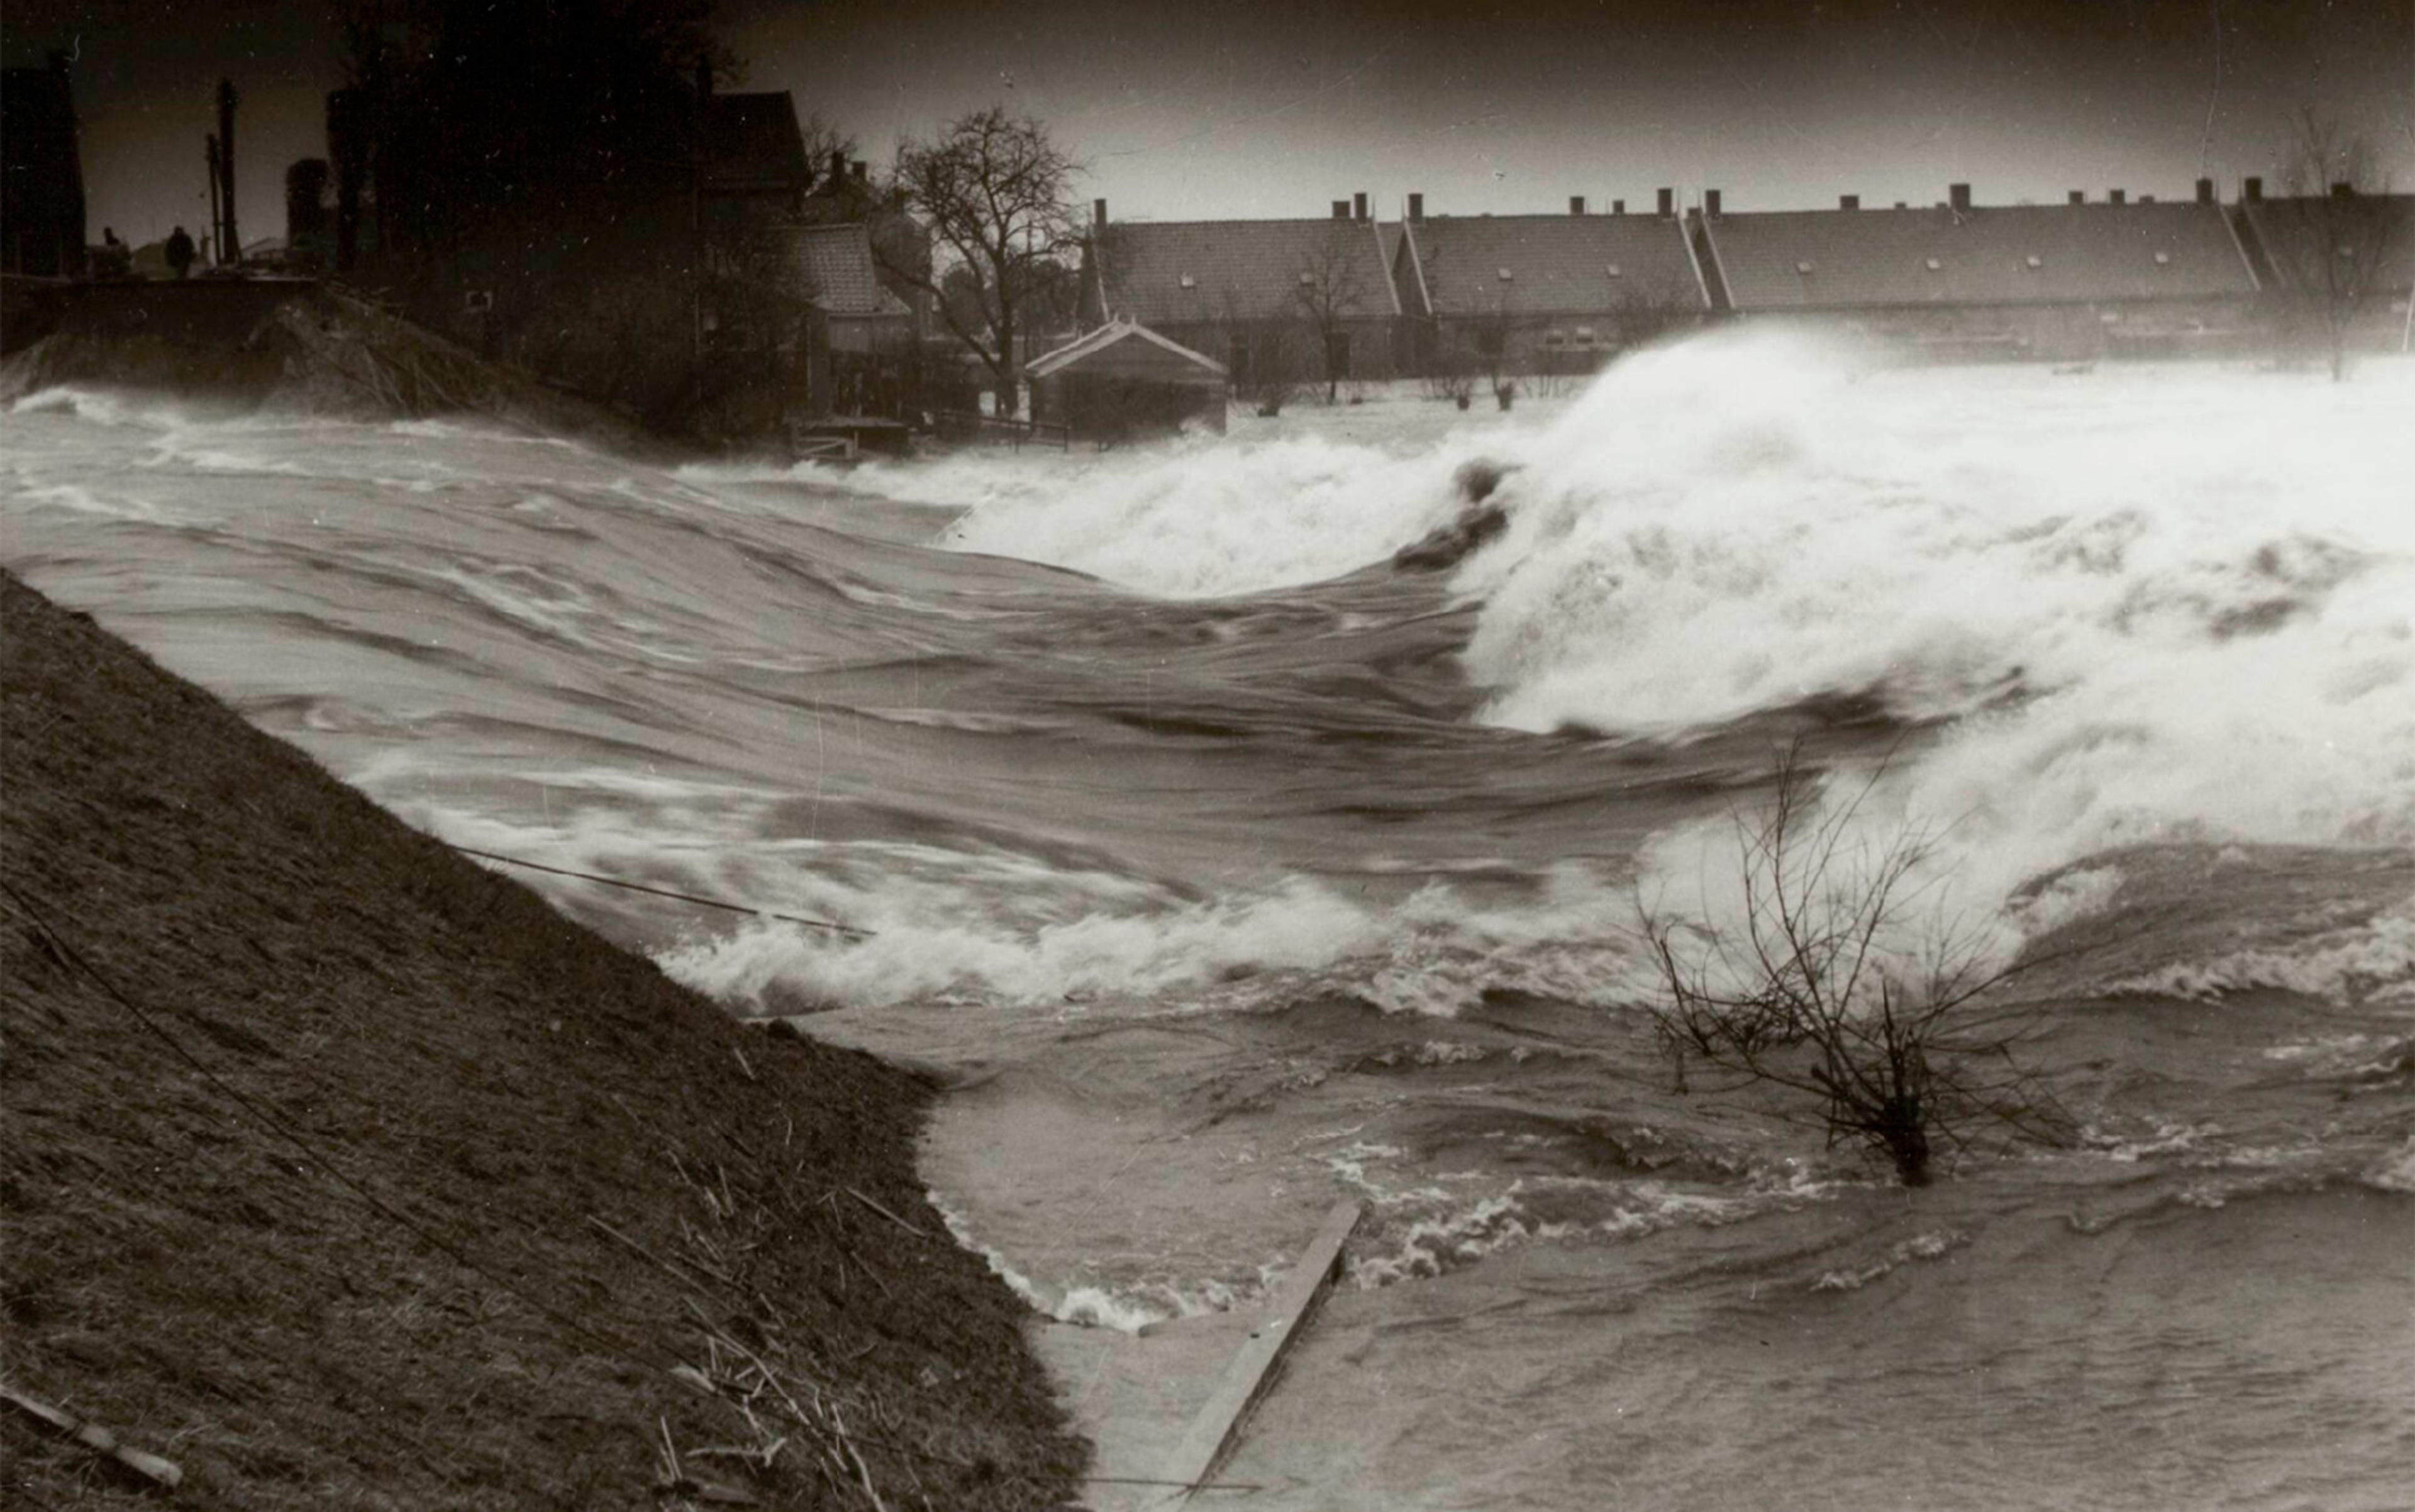 Black and white photograph depicts a flood with rising water levels in a residential area. Strong currents and waves are visible, and houses in the background are partially submerged. Floodwater covers much of the landscape, with a lone tree and partial wooden structure in the foreground.